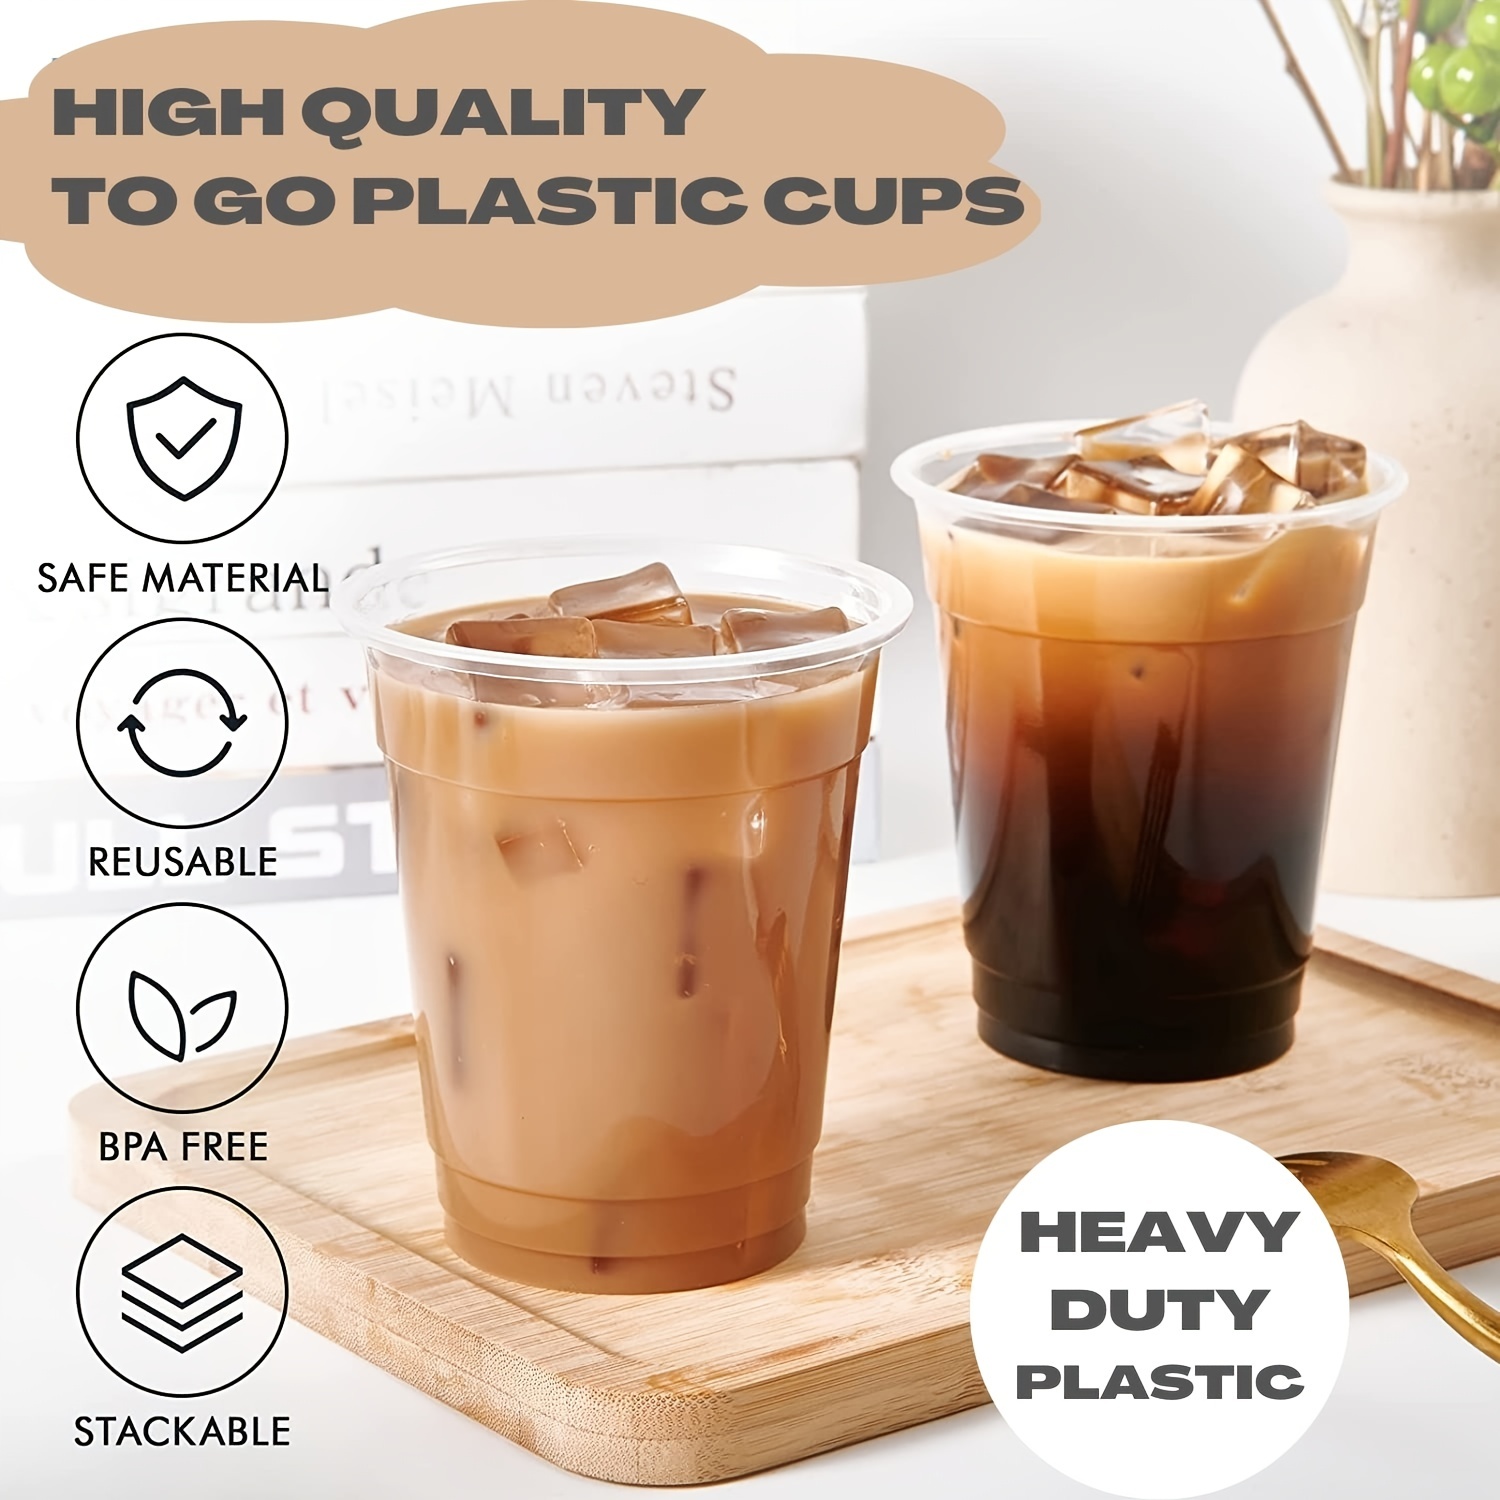  Ball Aluminum Cup Recyclable Party Cups, 12 oz. Cup, 50 Cups  Per Pack : Health & Household